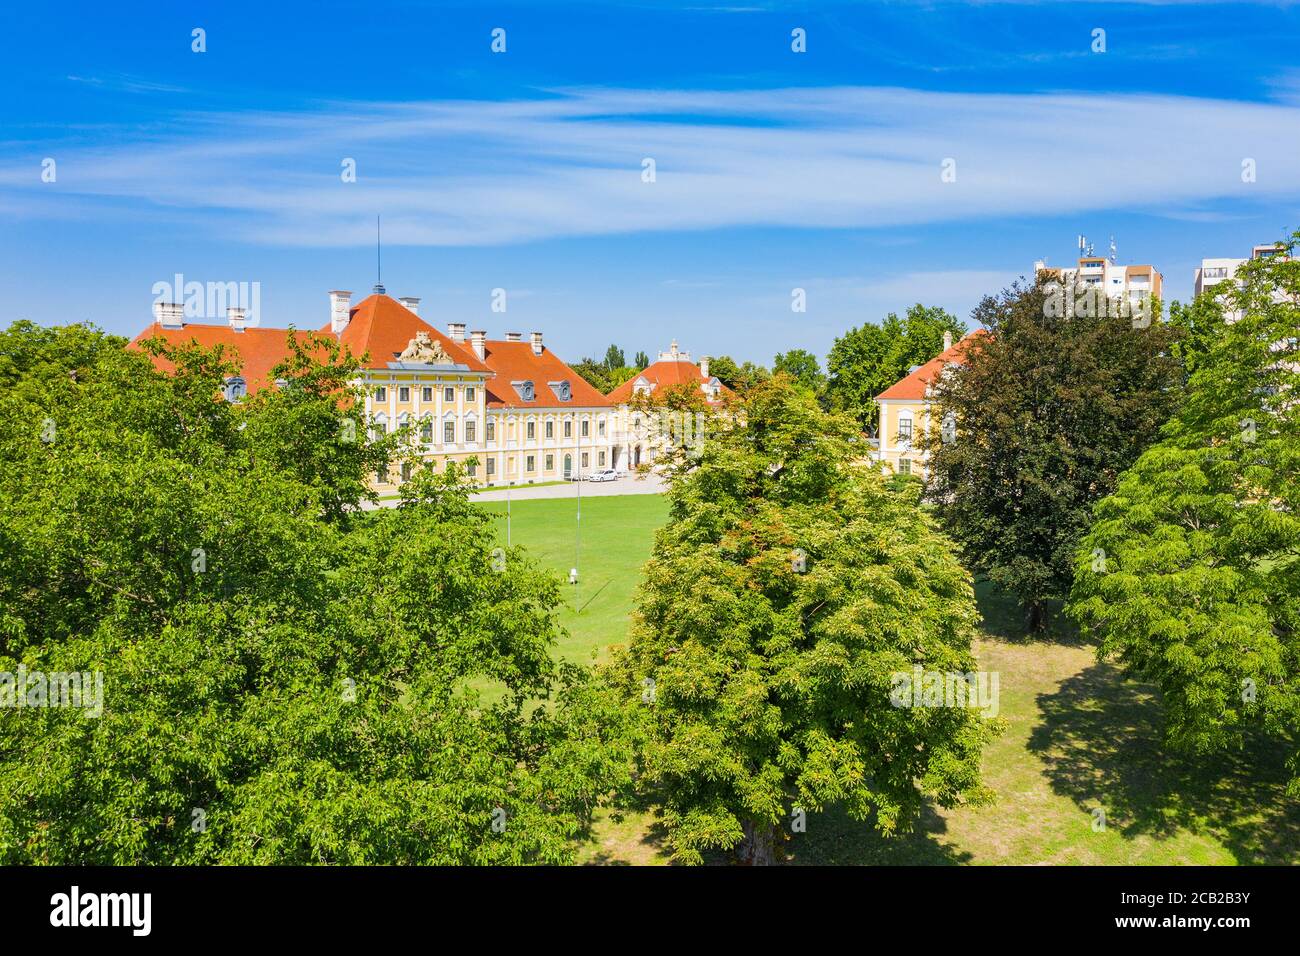 Croatia, aerial view of the old town of Vukovar, city museum in old castle in park, classic historic architecture and down town horizon Stock Photo